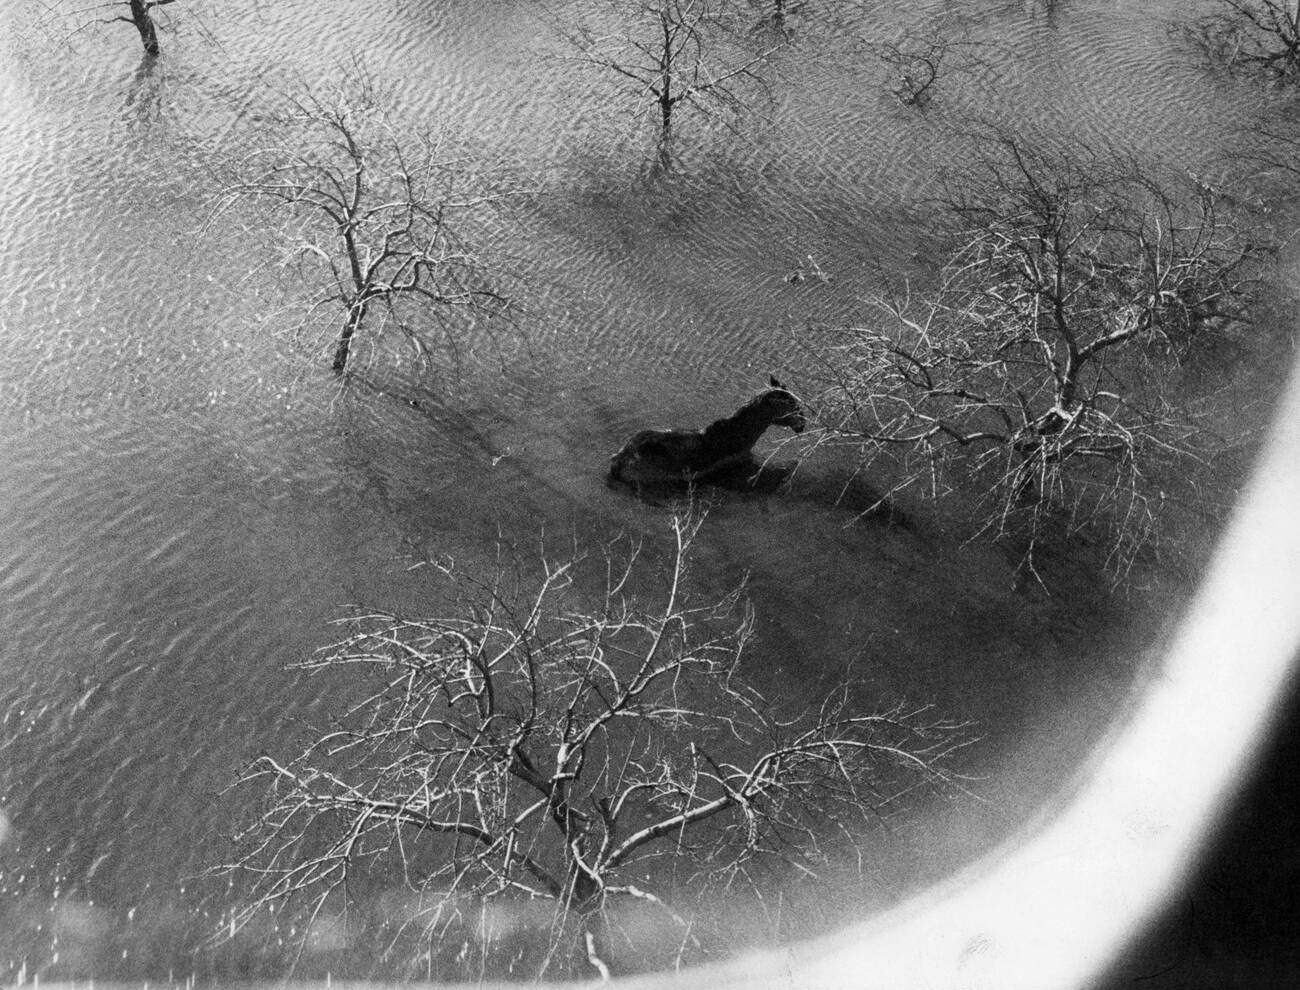 Horse in the water during the North Sea Flood of 1962 in Hamburg, West Germany